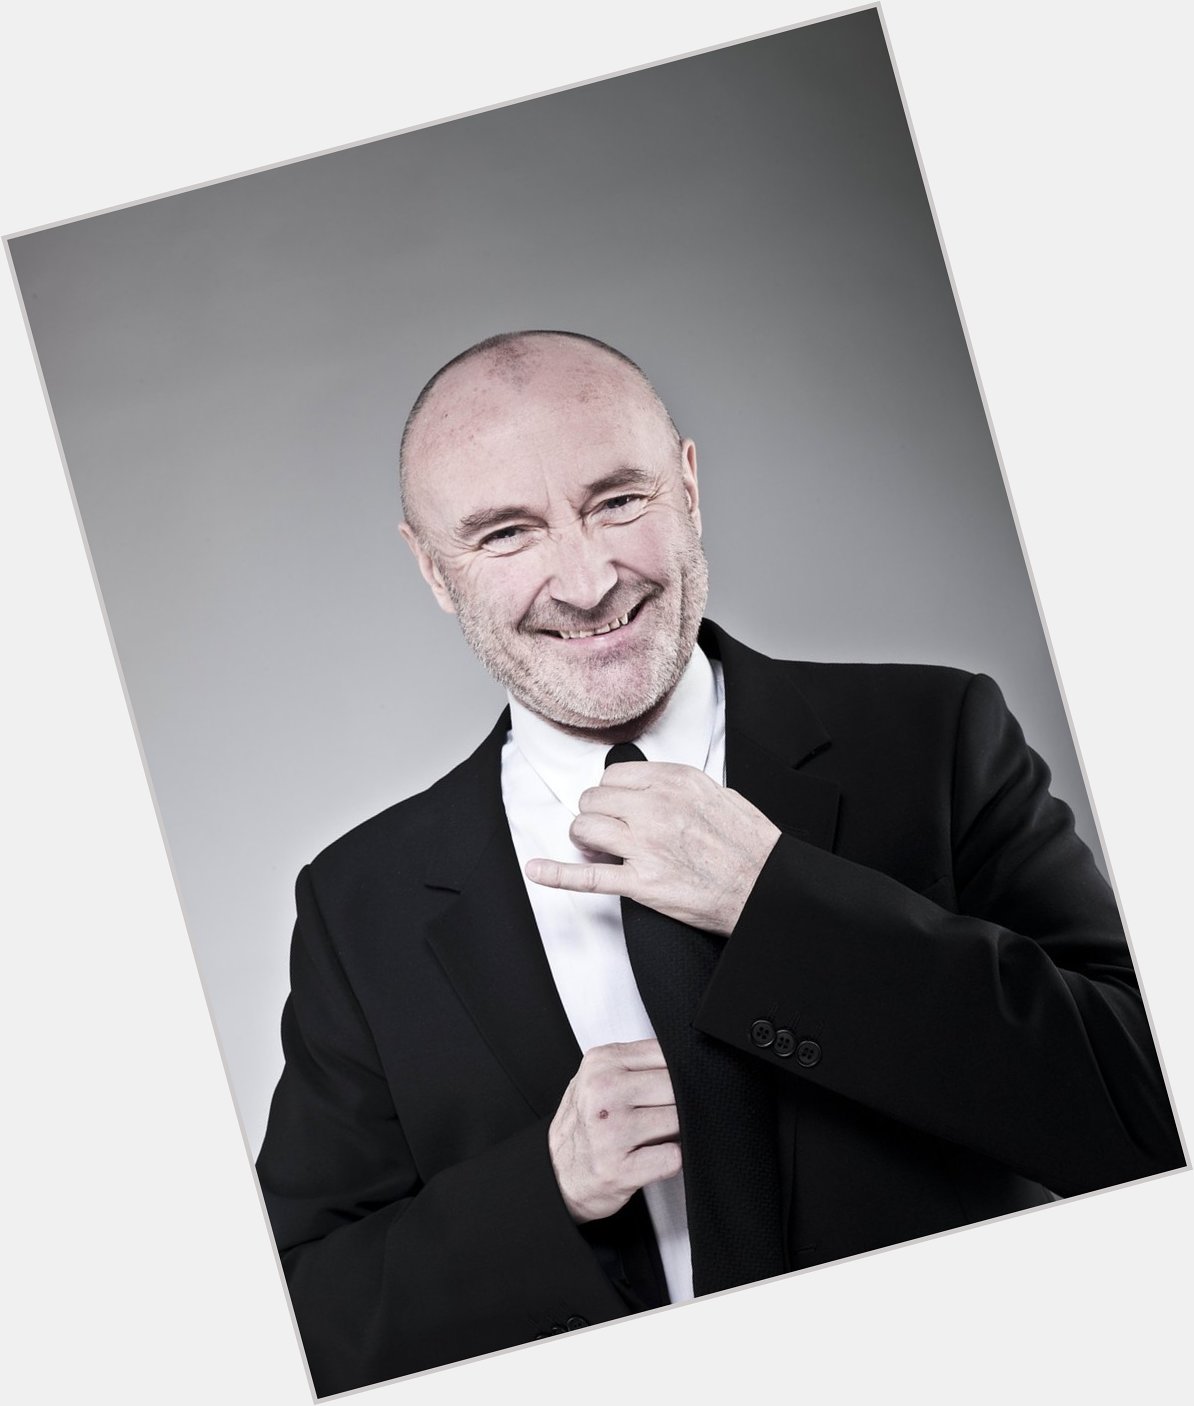 Happy birthday, Phil Collins! The Genesis drummer and prolific songwriter turns 70 years old today. 